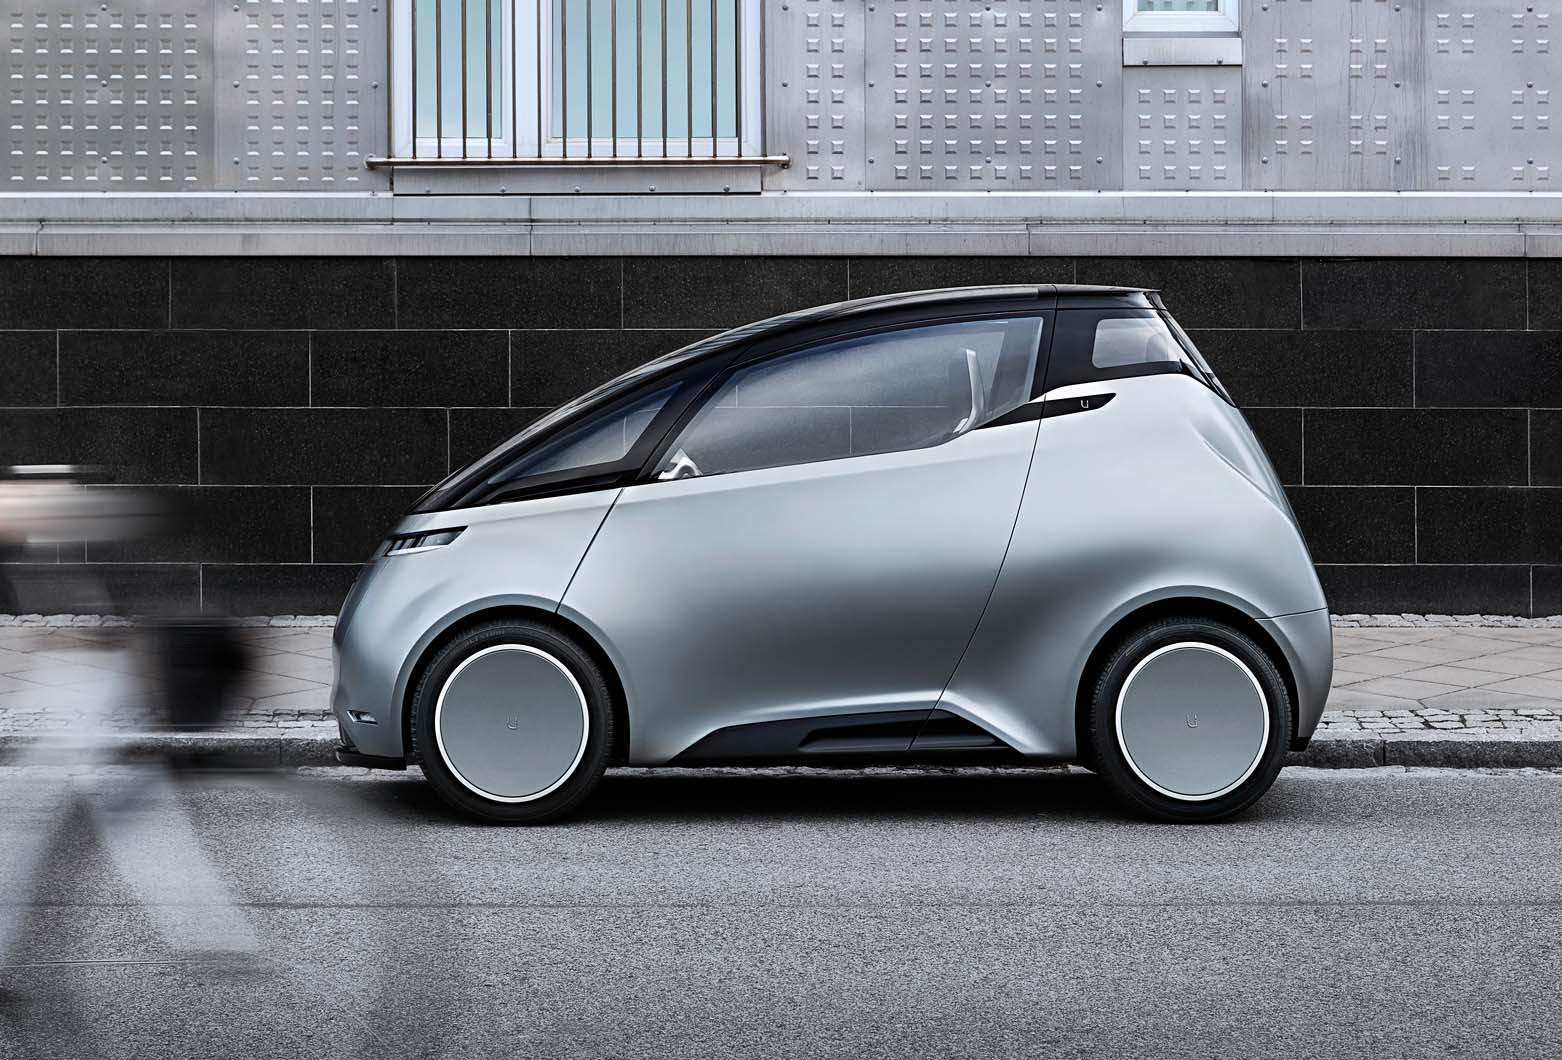 Uniti One electric car production planned for the UK in 2020 Autocar